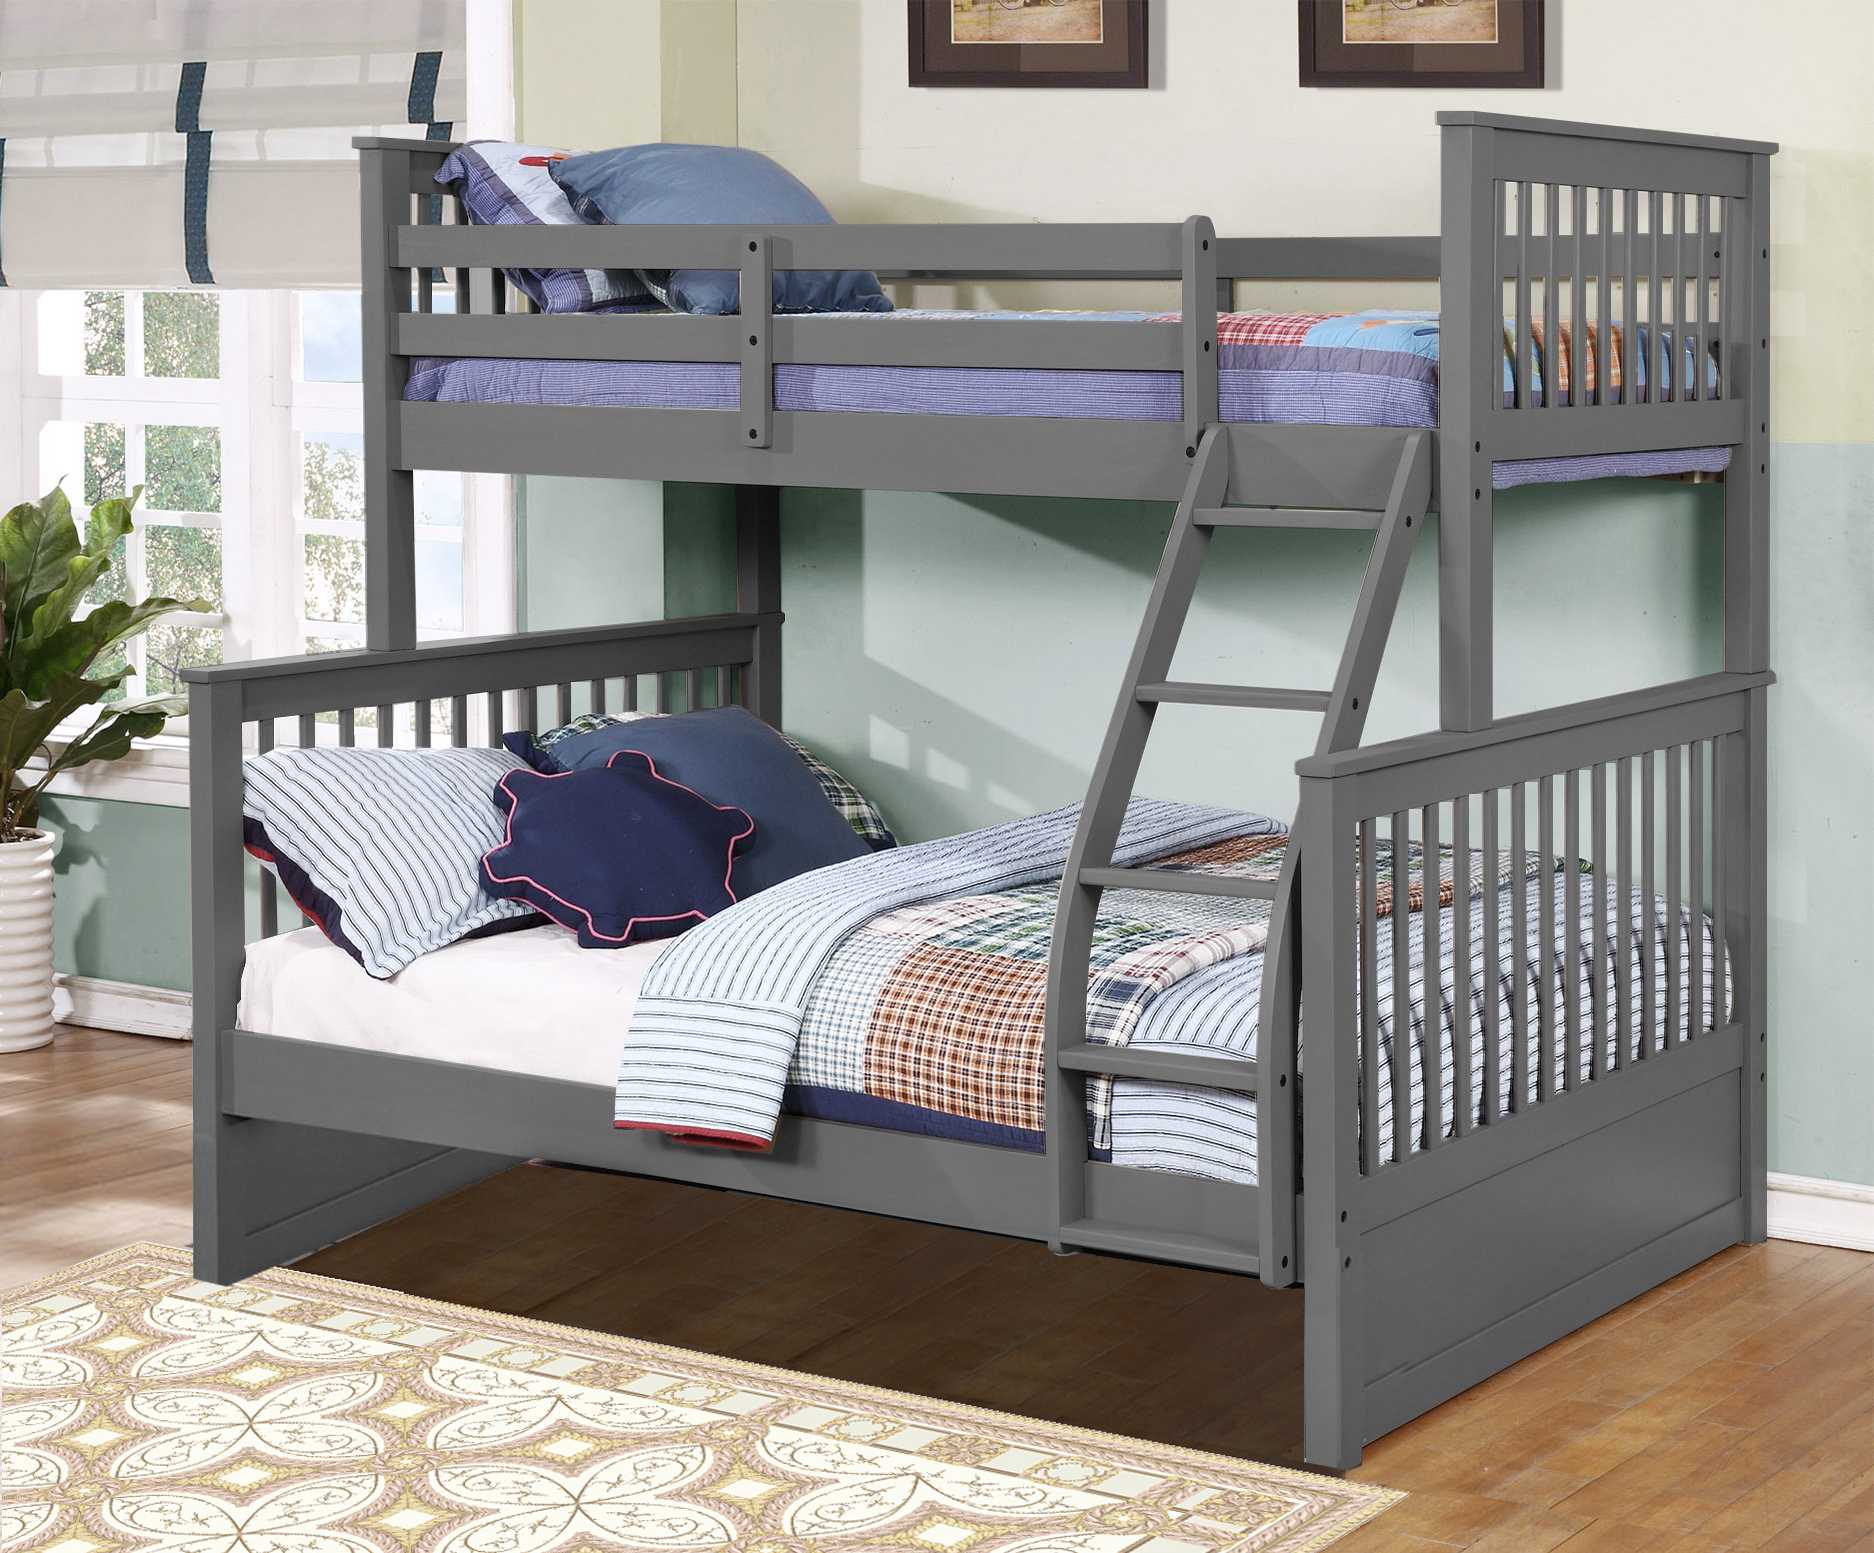 80.5" X 41.5-57.5" X 70.25" Grey Manufactured Wood and Solid Wood Twin or Full Bunk Bed